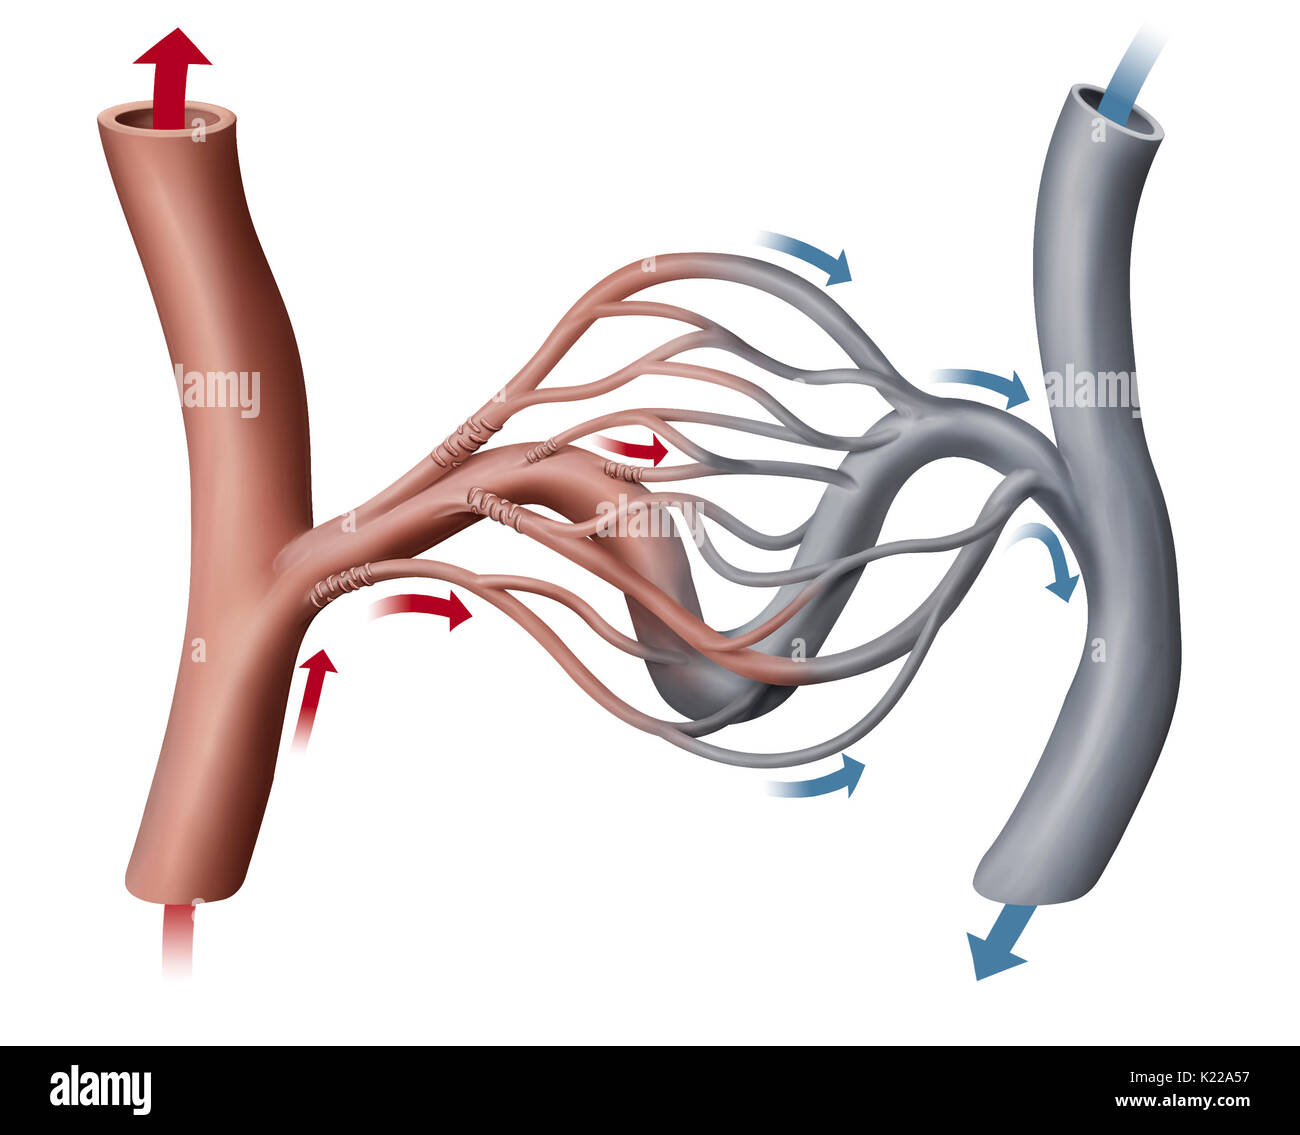 Tiny blood vessel ensuring blood circulation between an arteriole and a venule; its wall allows exchanges between blood and the exterior surface of the capillary. Stock Photo